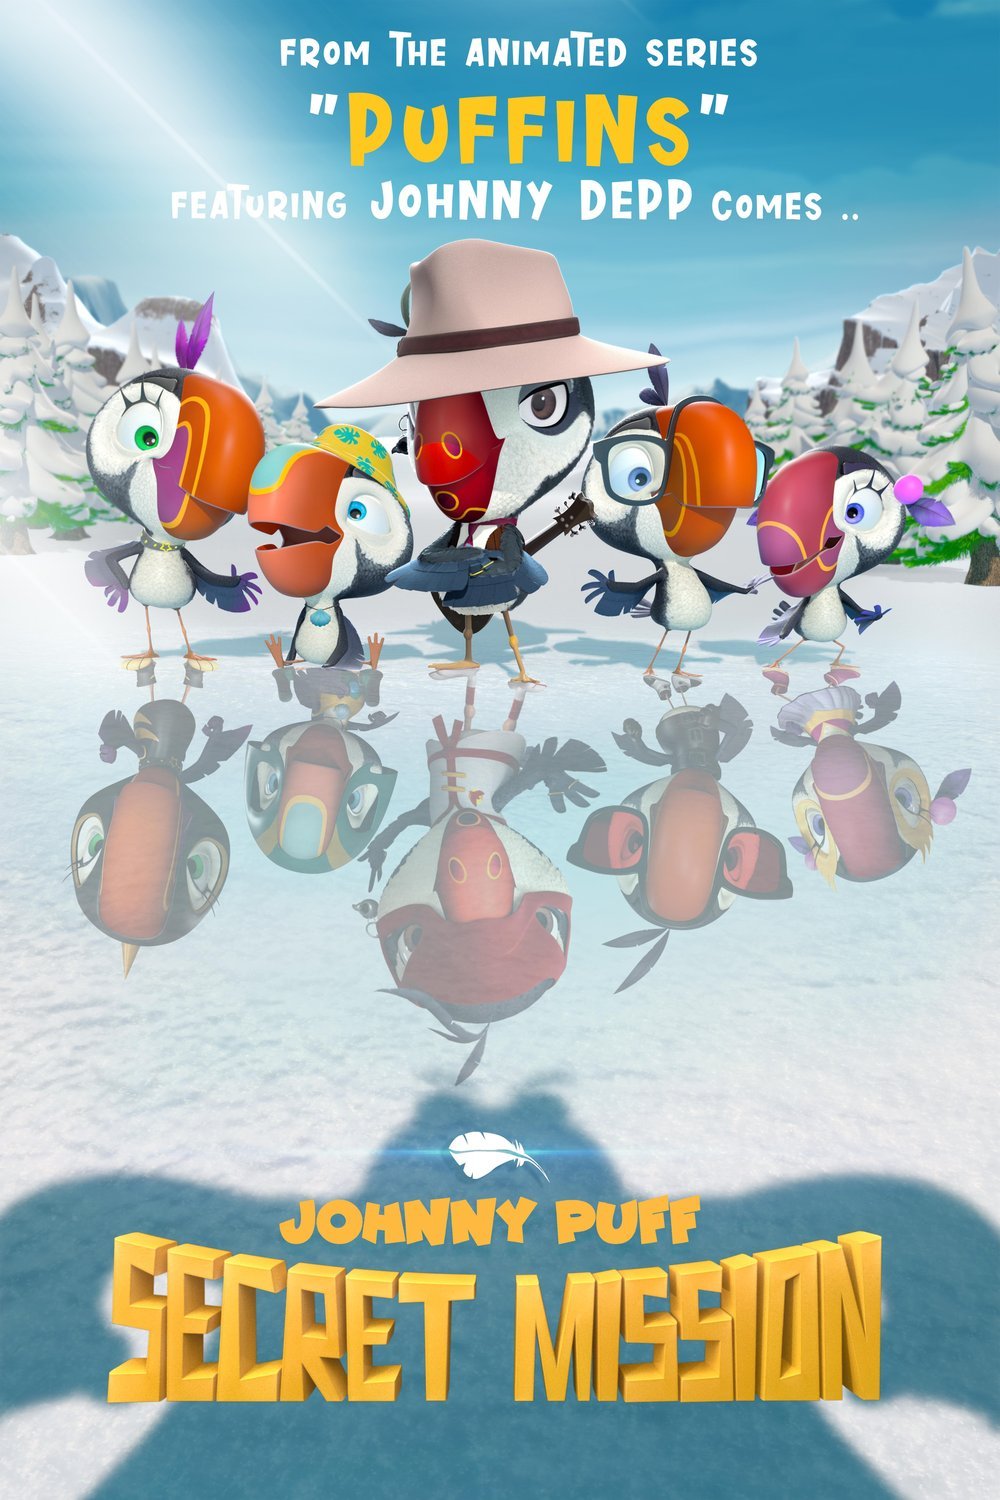 Poster of the movie Johnny Puff: Secret Mission